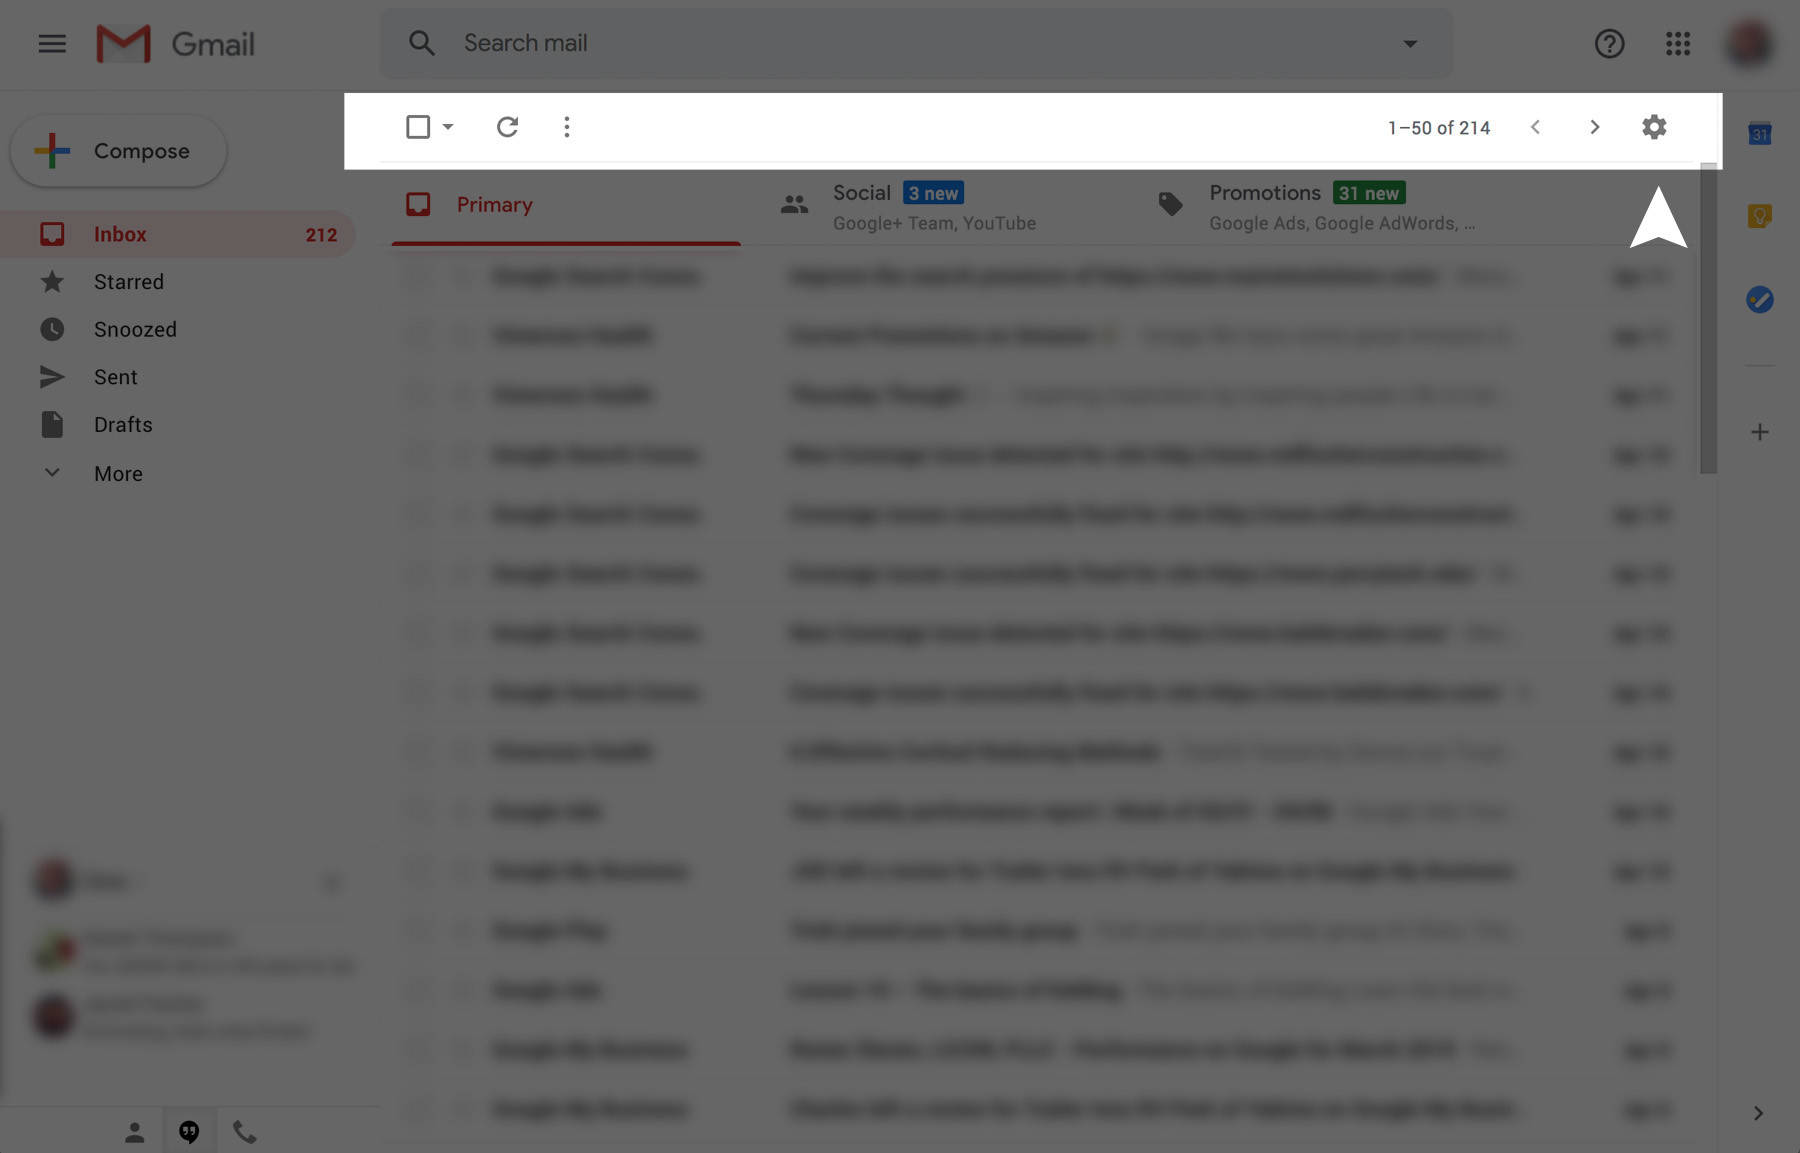 1) Sign in to Gmail and select the gear icon.